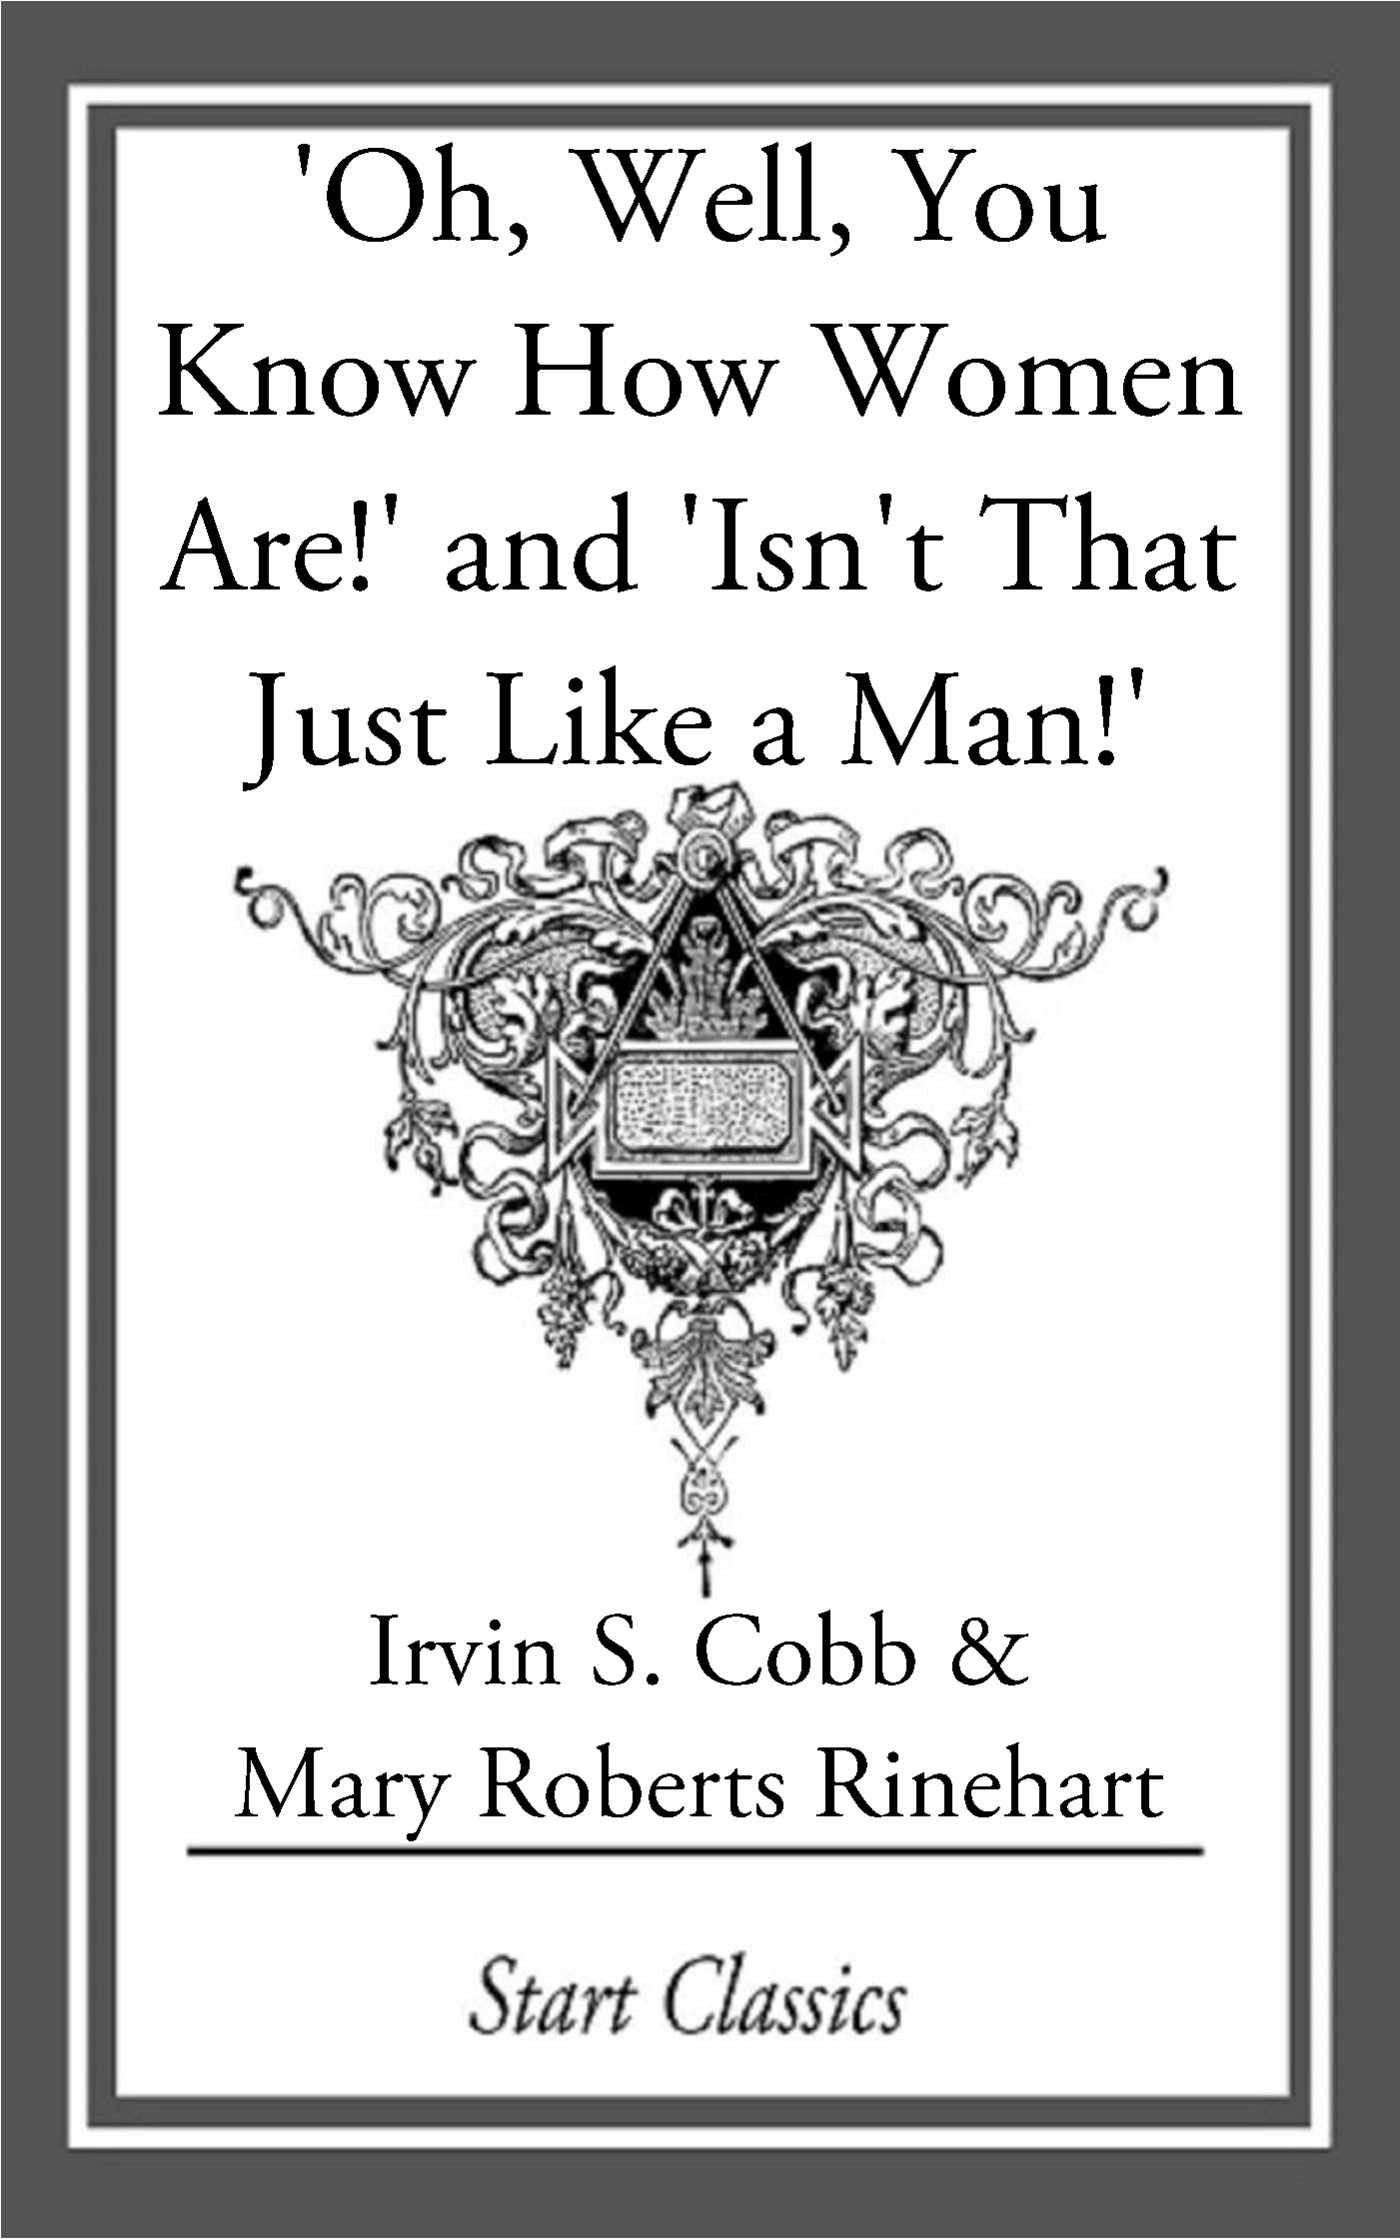 Oh, Well, You Know How Women Are!' and 'Isn't That Just Like a Man!' - Irvin S. Cobb